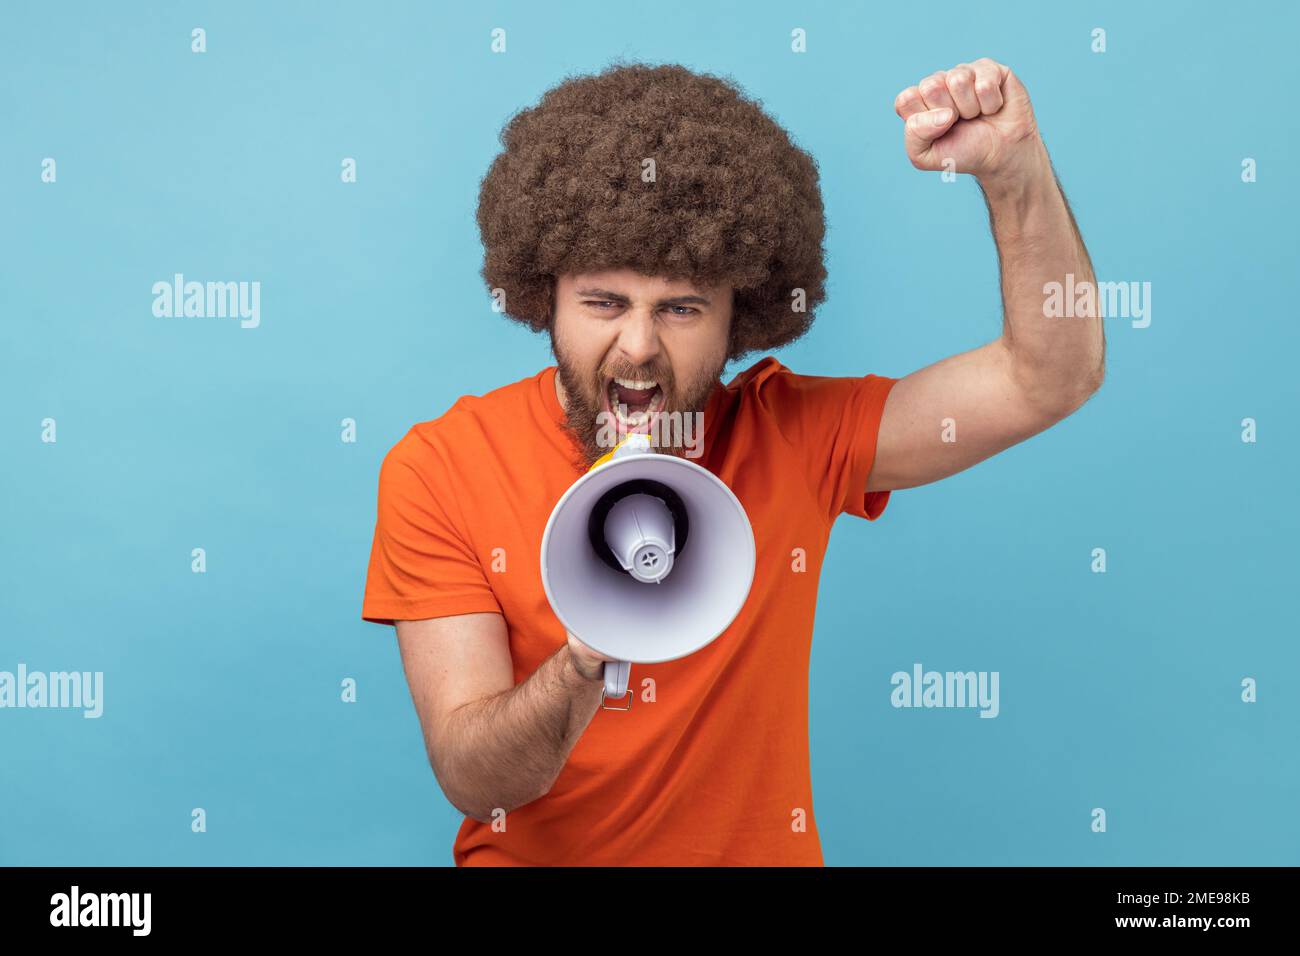 Portrait of serious man with Afro hairstyle wearing orange T-shirt raised hands and holding megaphone, screaming in loud speaker, protesting. Indoor studio shot isolated on blue background. Stock Photo